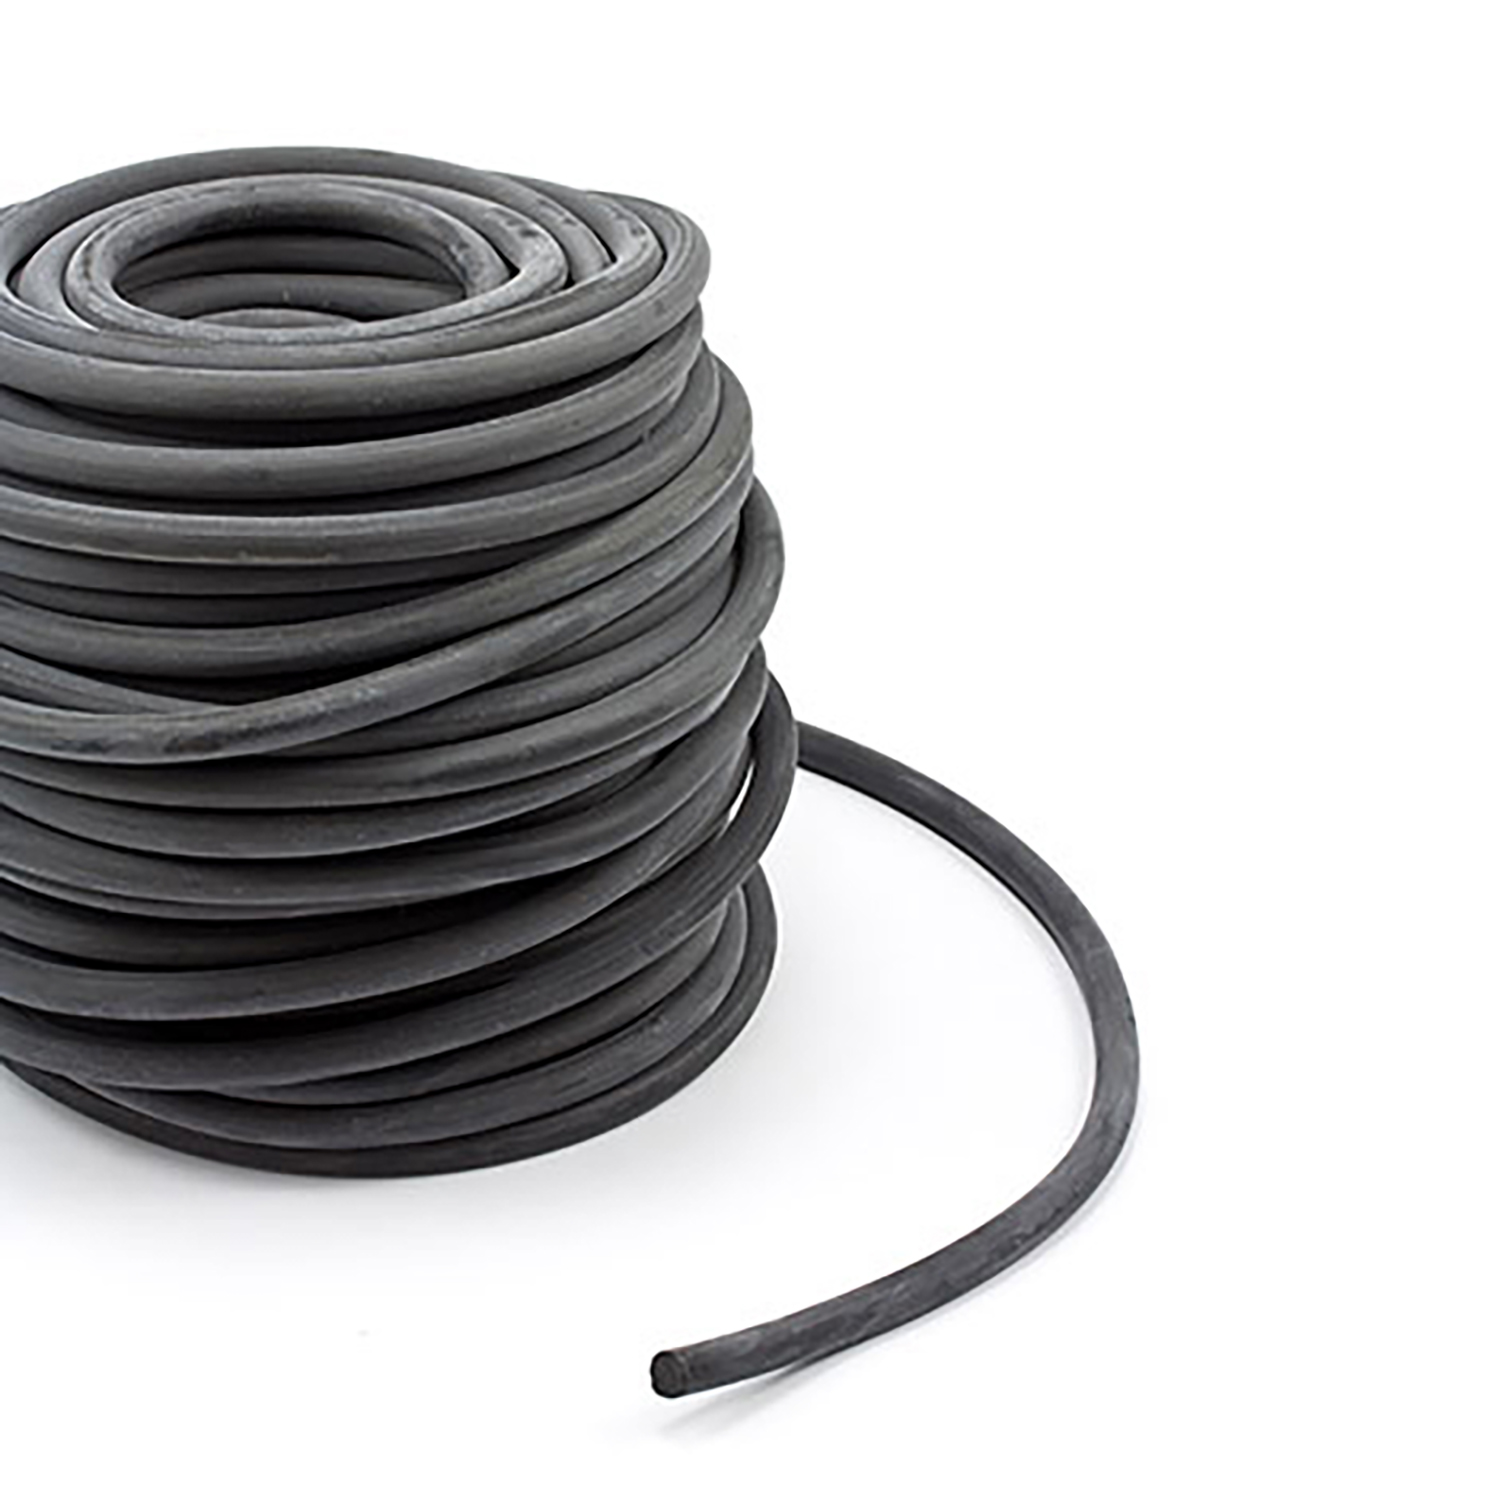 Synthetic Rubber (EPDM) Rope 7/16